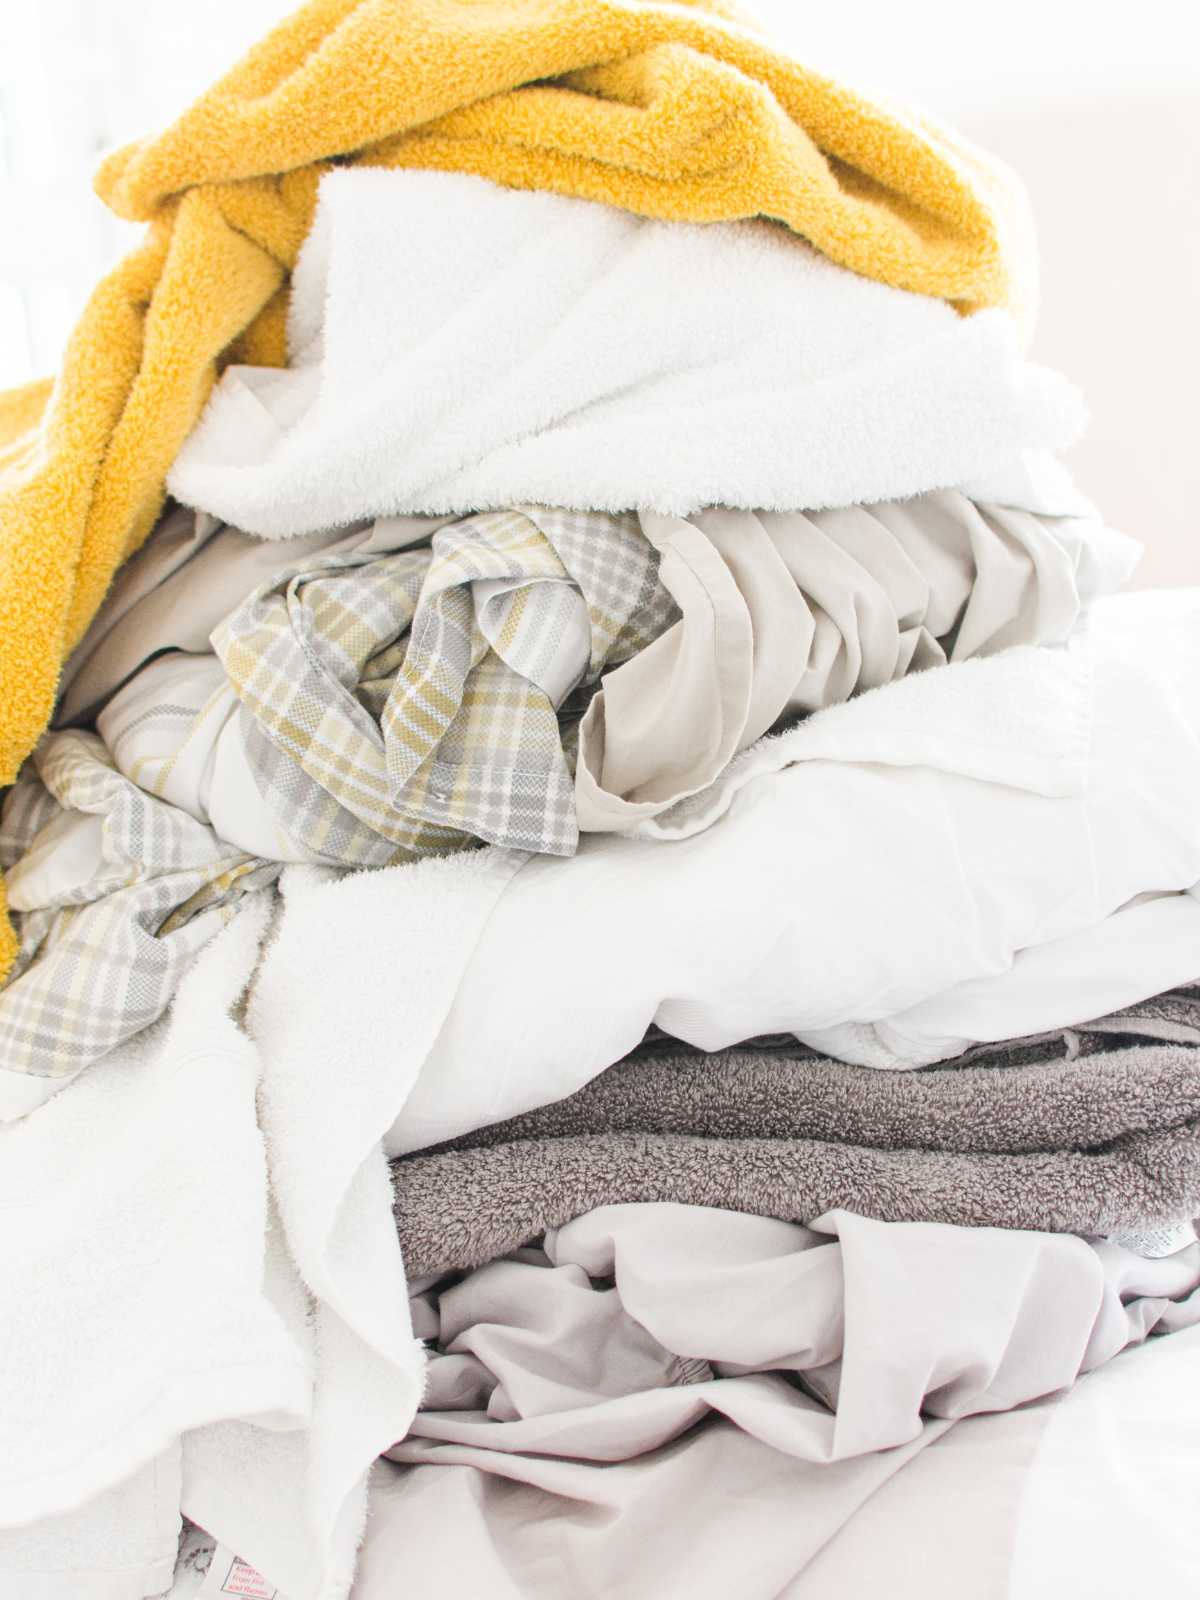 How To Remove Stains From White Clothes Without Washing